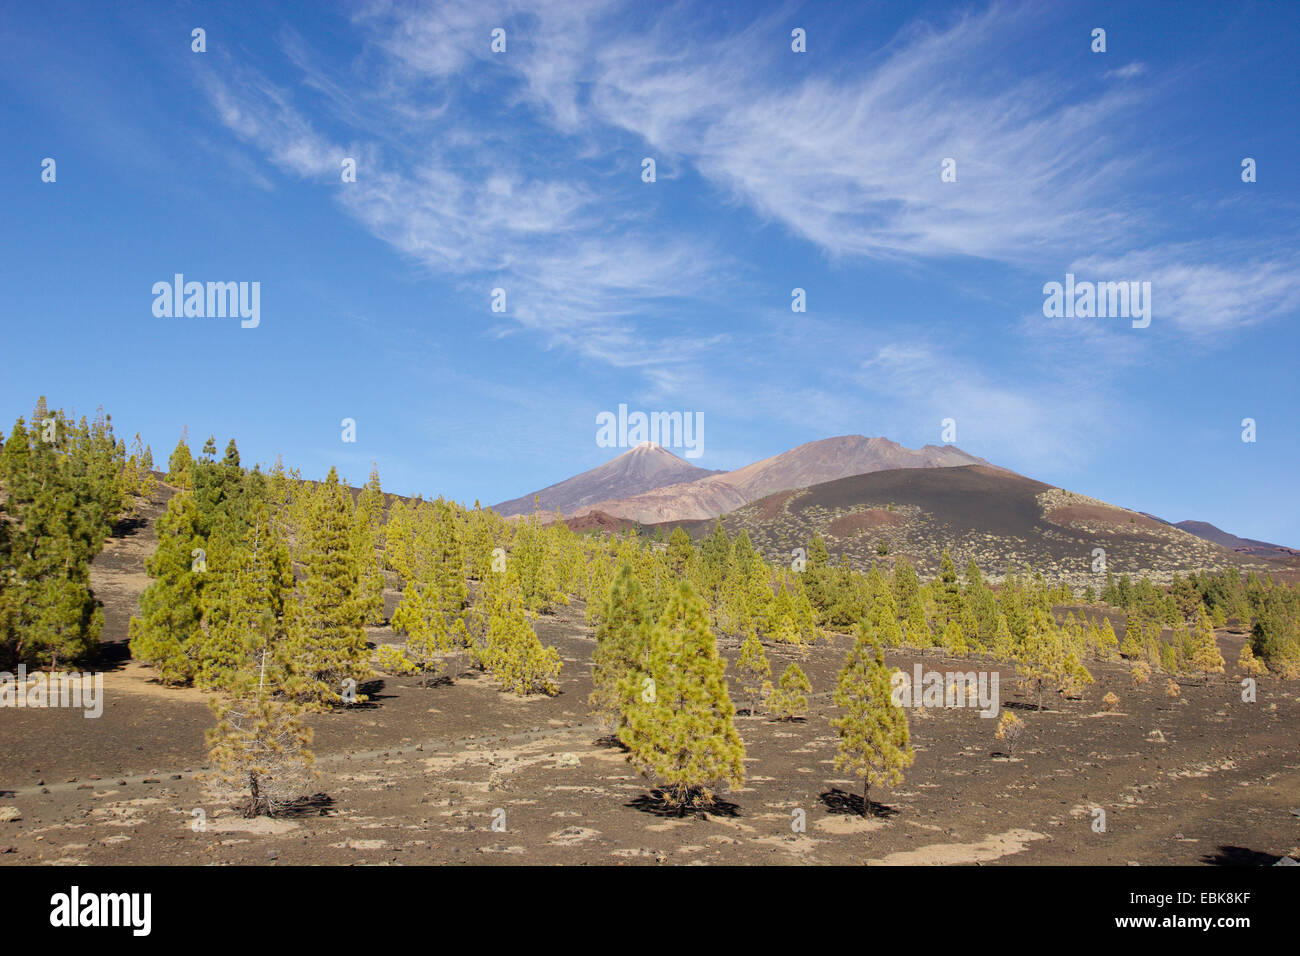 Canary pine (Pinus canariensis), pine forest at Teide and Poco Viejo, Canary Islands, Tenerife, Teide National Park Stock Photo